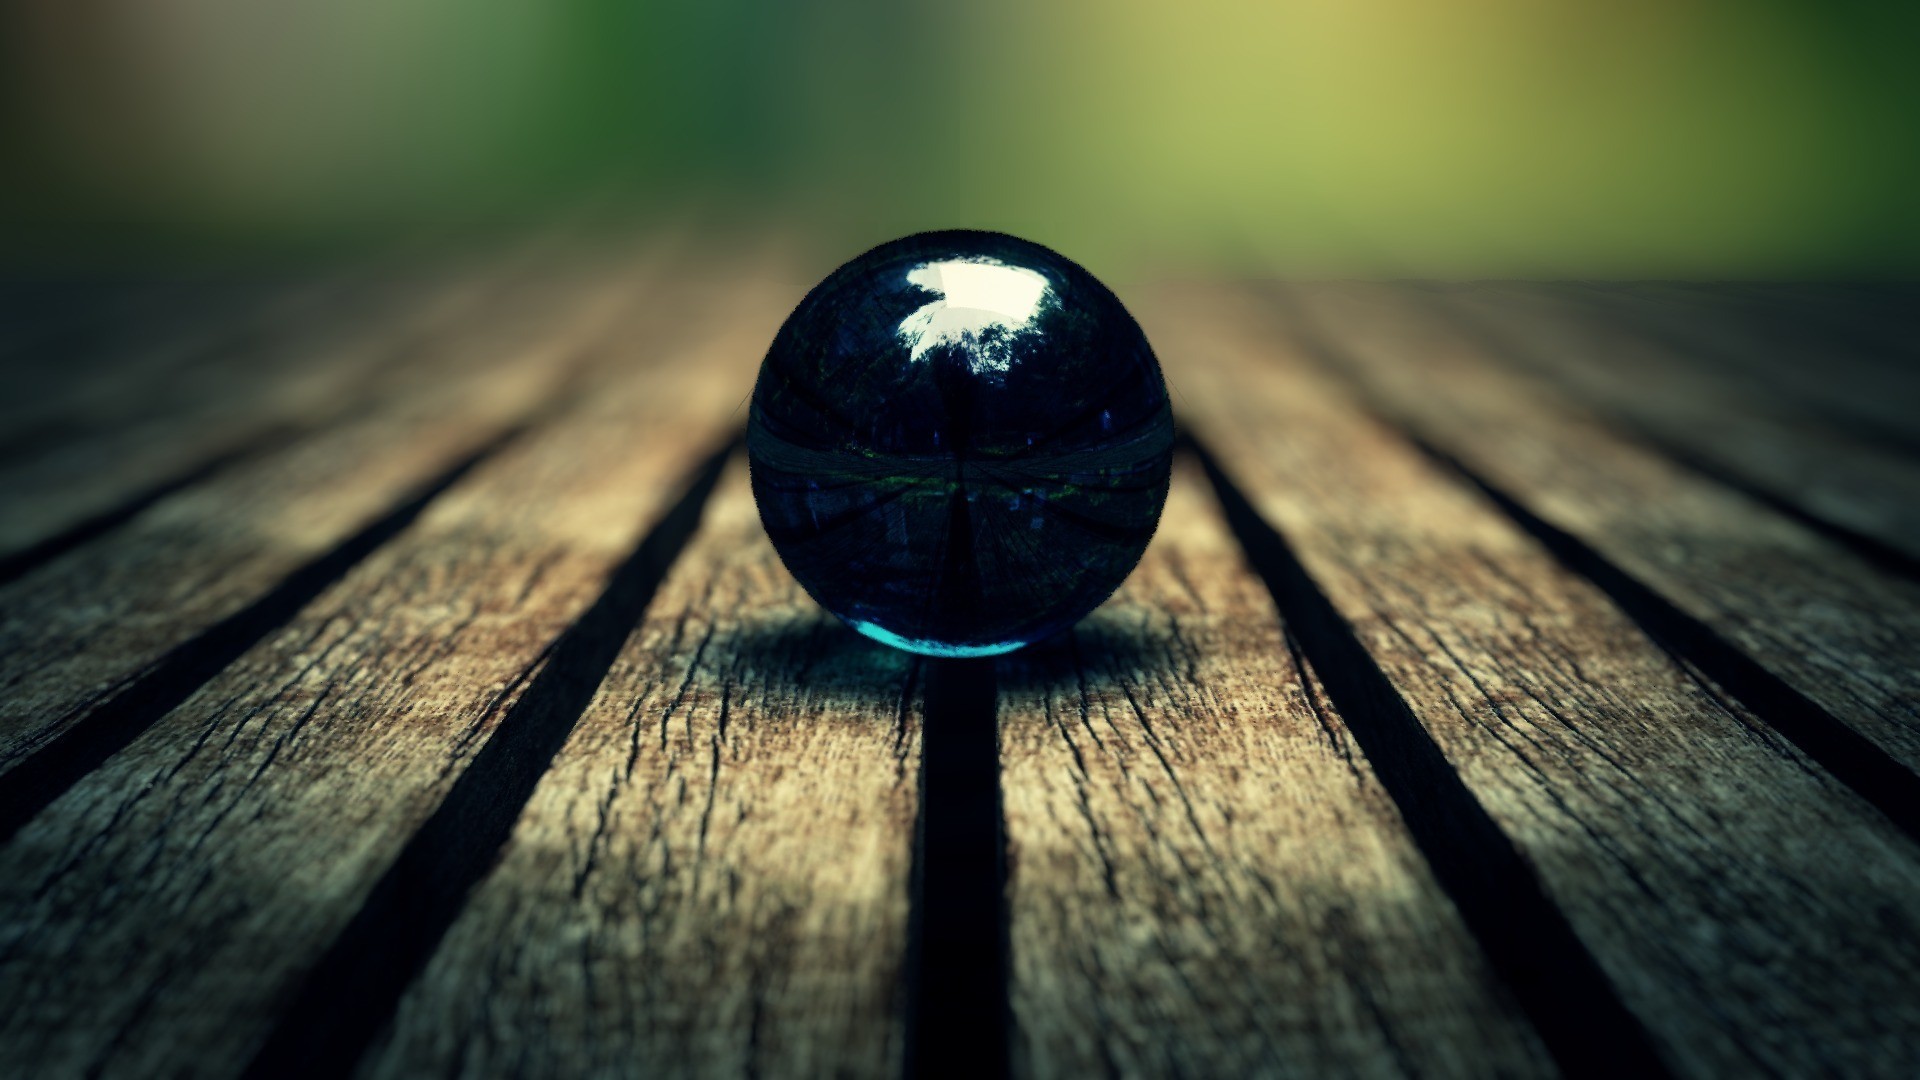 General 1920x1080 simple background elements marble dark blue blue photography macro ball